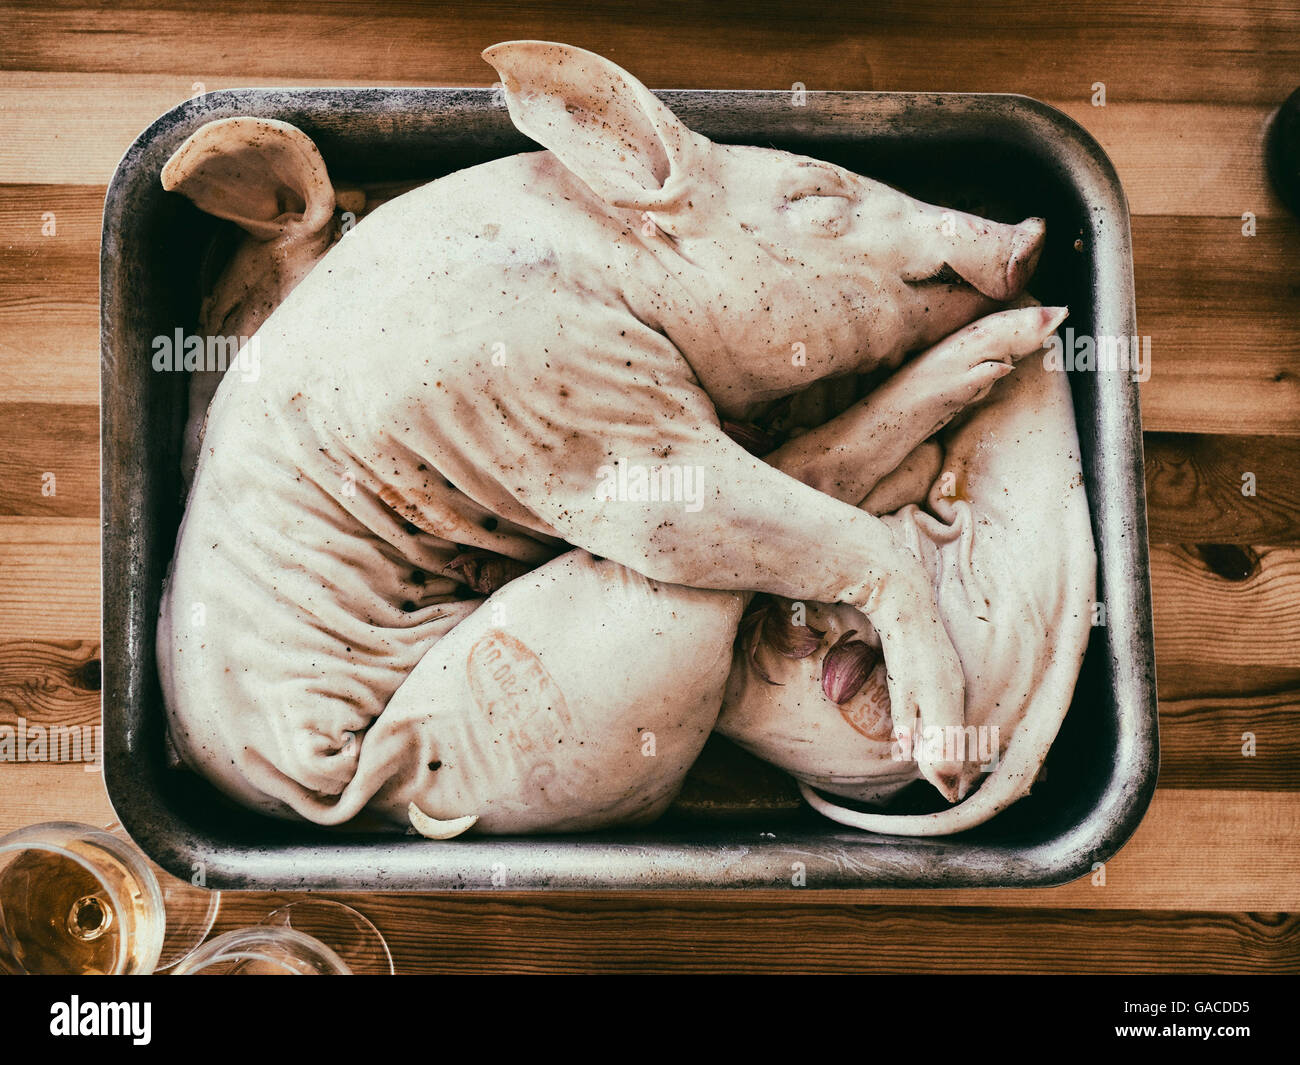 Suckling Pig ready for cooking Stock Photo